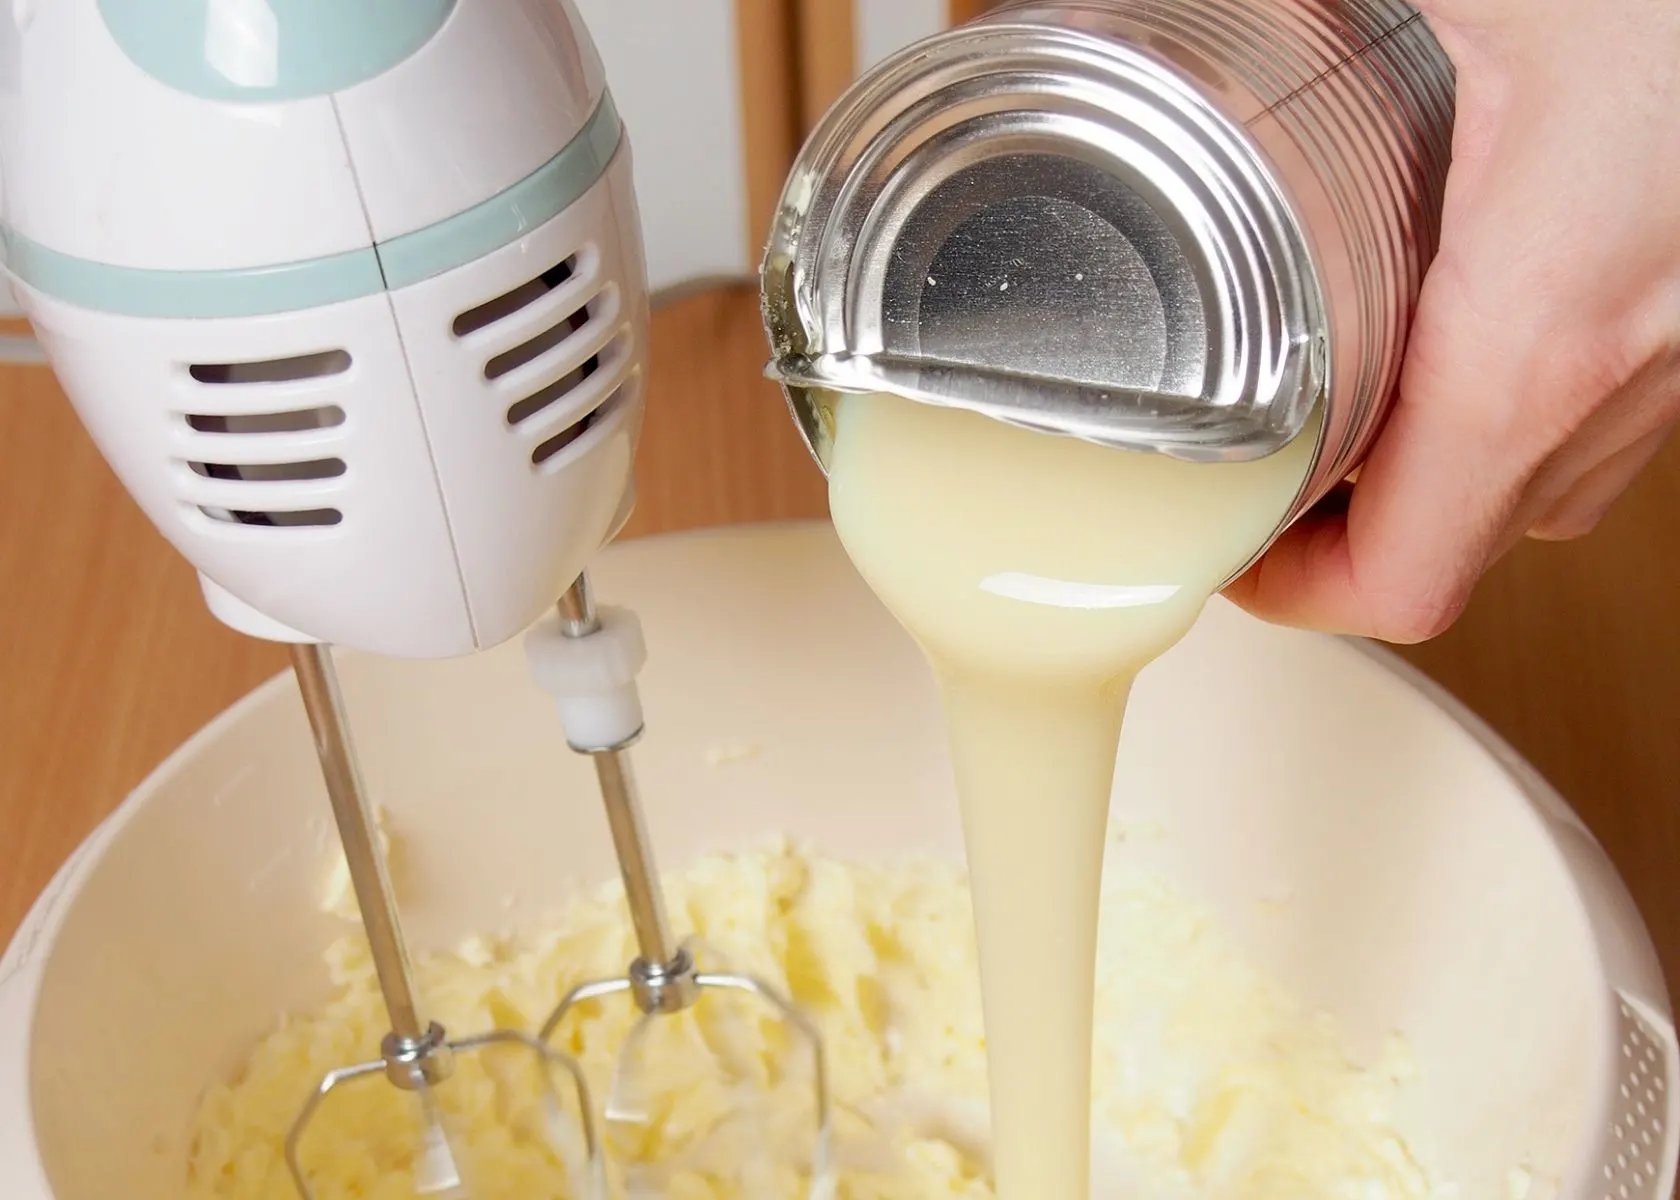 Sweetened condensed milk is poured into mixing bowl and blended with baking ingredients.